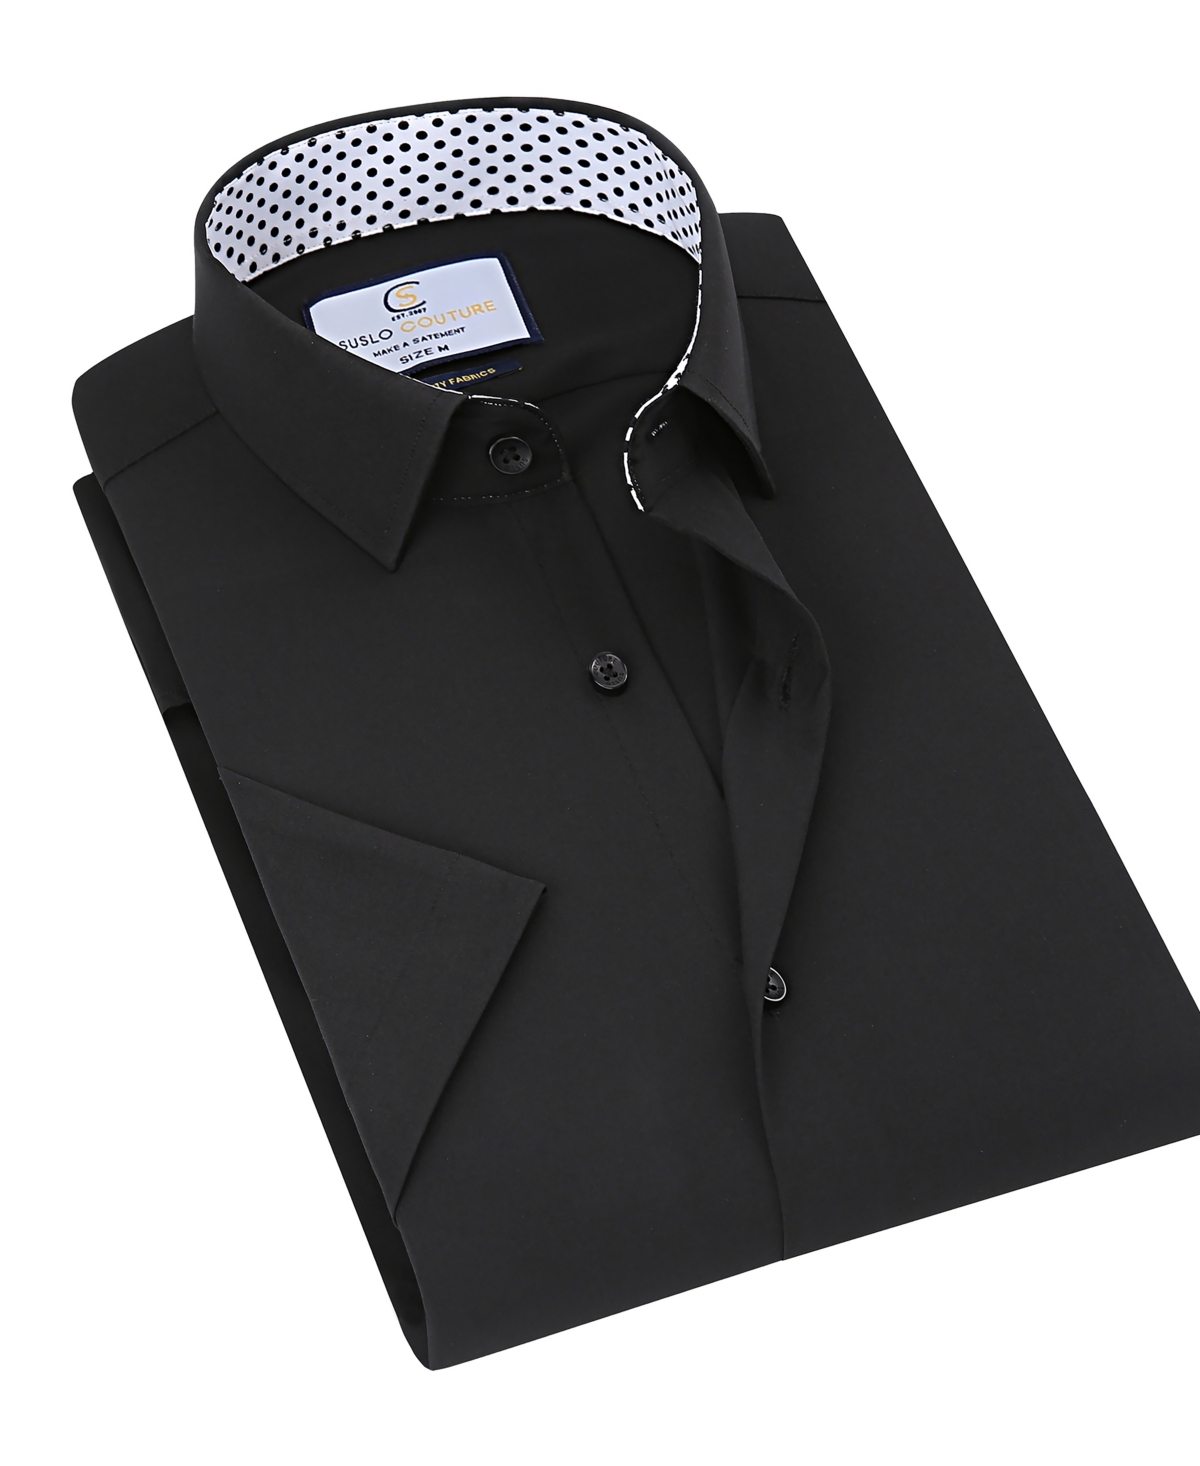 Men's Slim Fit Performance Short Sleeves Solid Button Down Shirt - Black